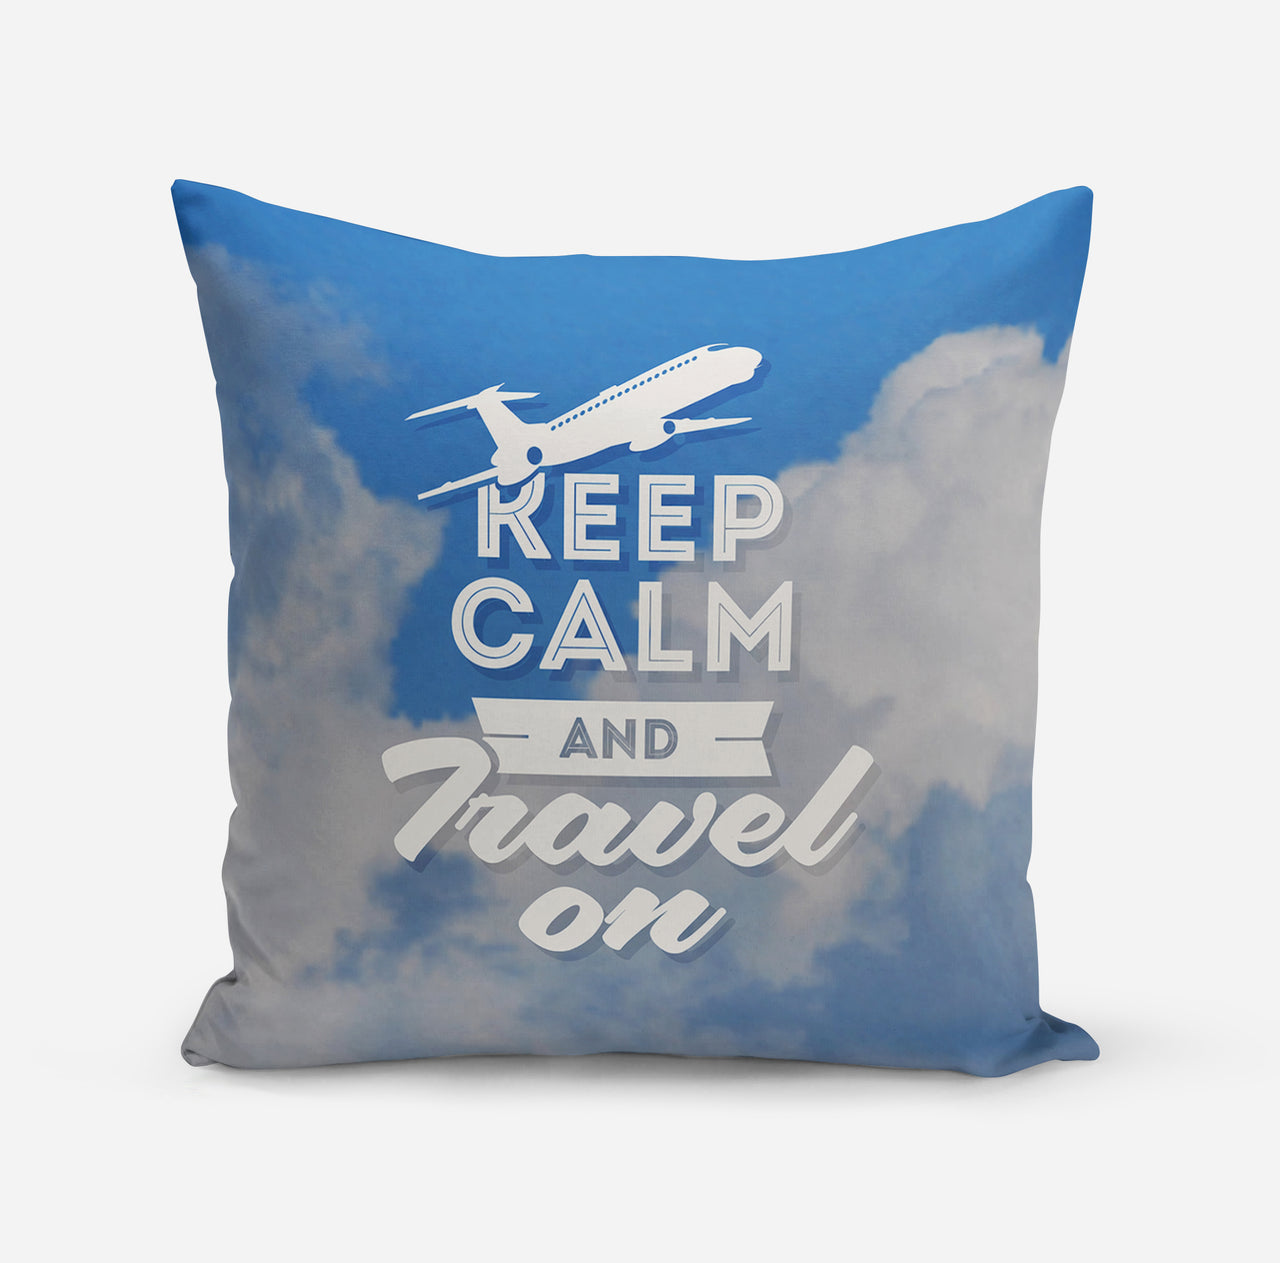 Keep Calm and Travel On Designed Pillows